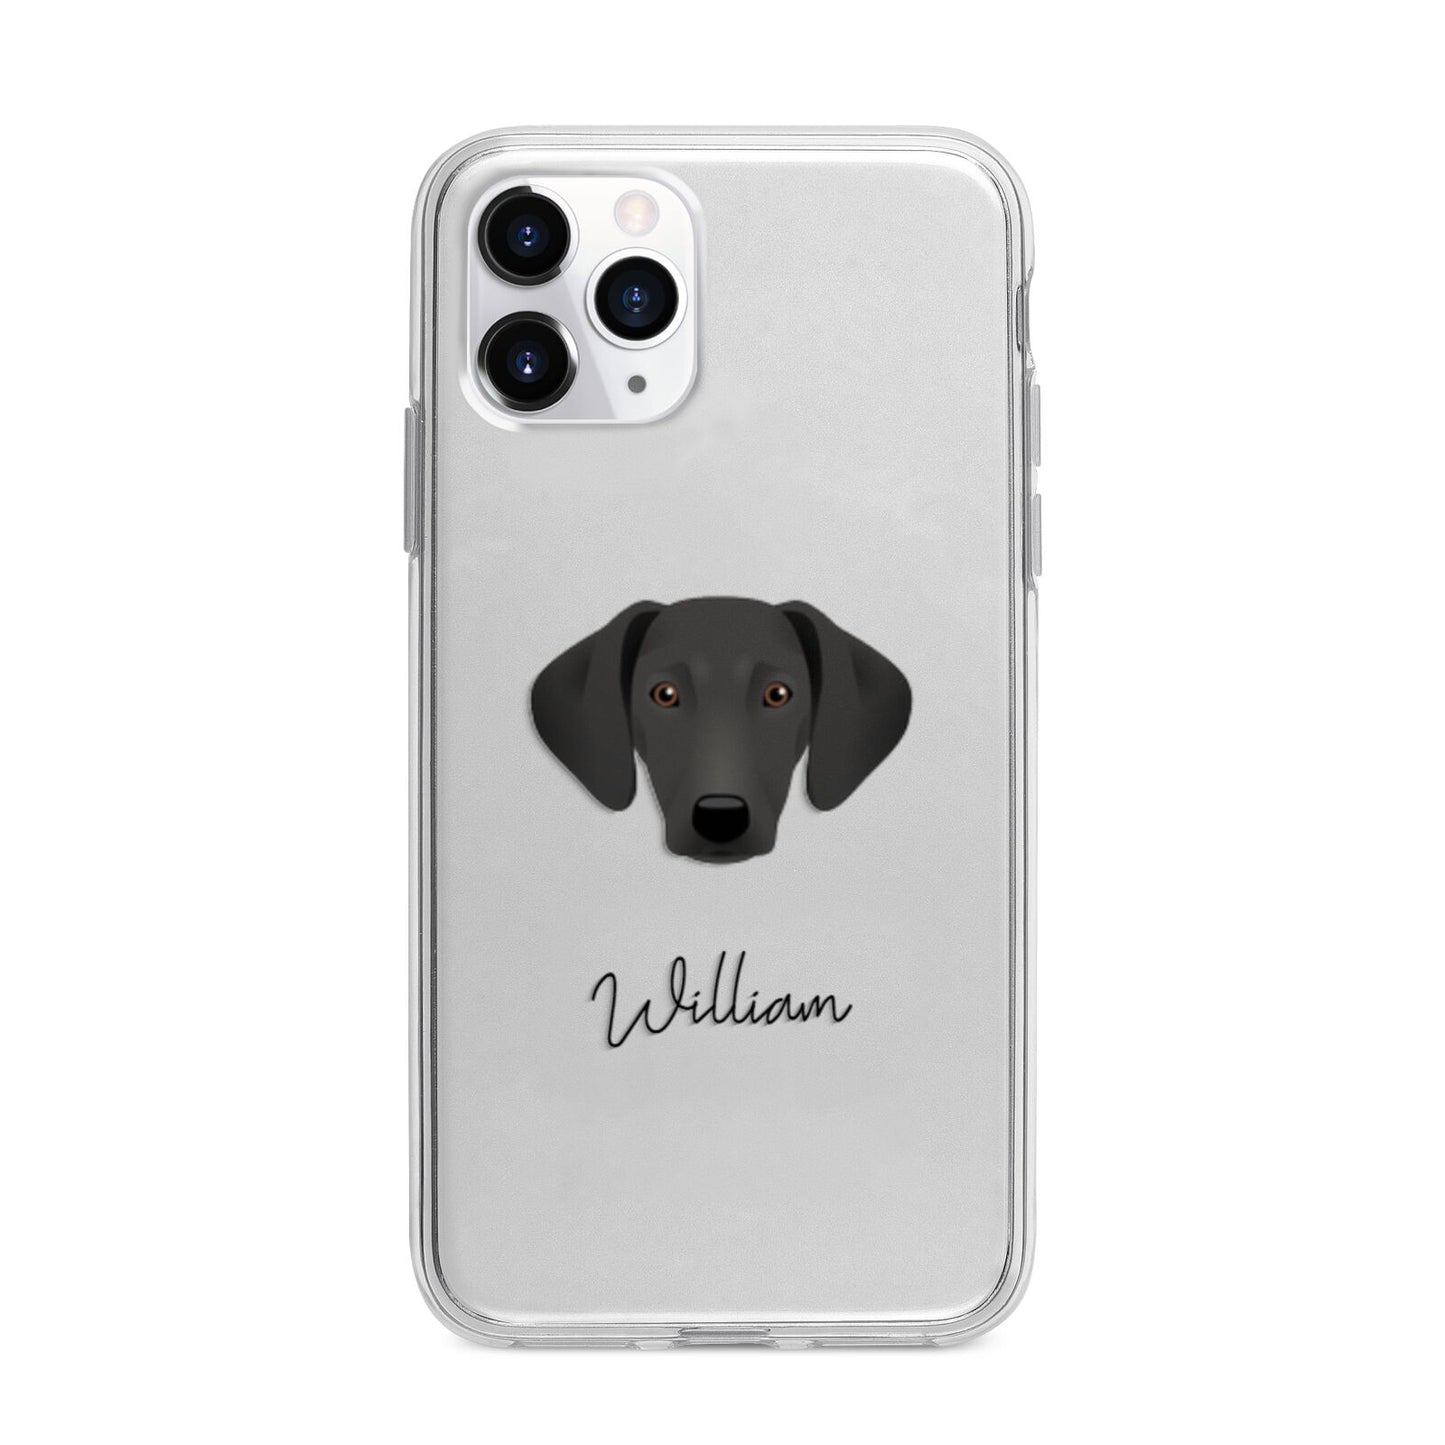 Greek Harehound Personalised Apple iPhone 11 Pro Max in Silver with Bumper Case